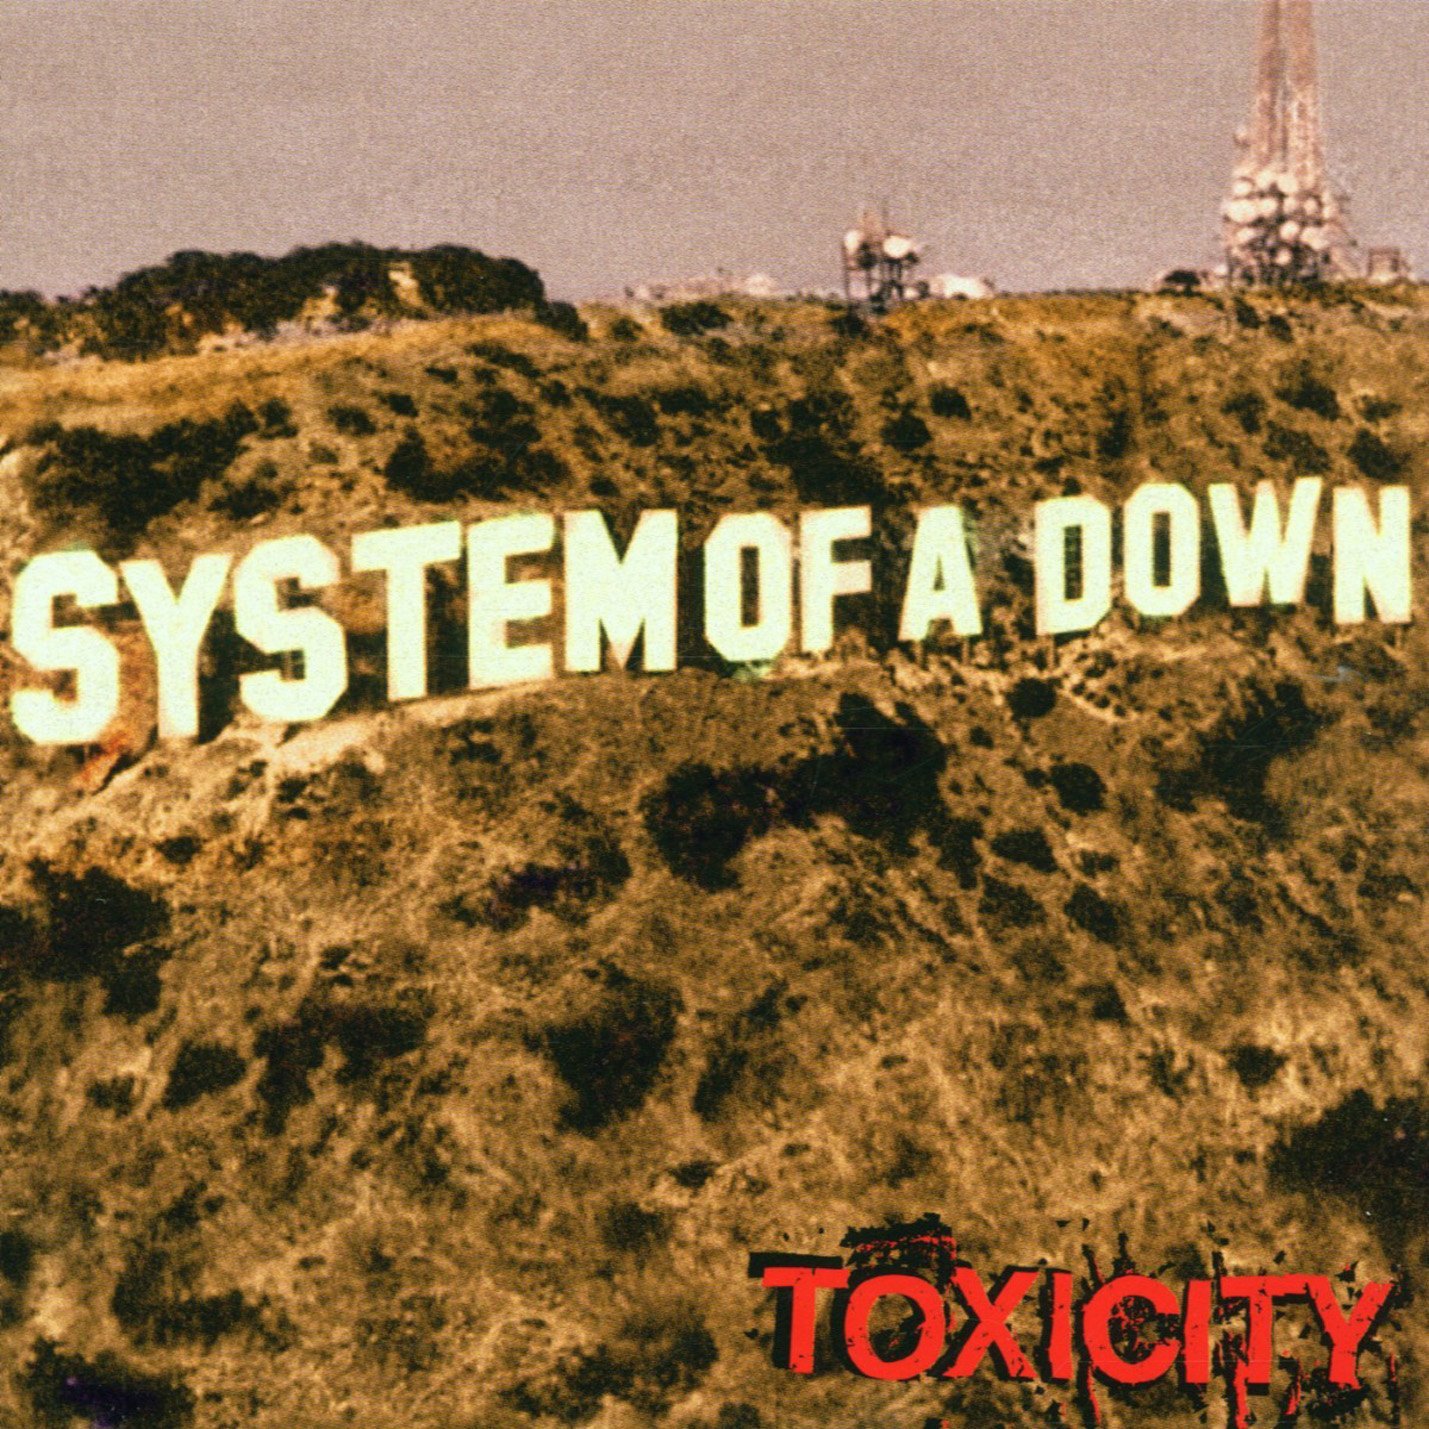 System Of A Down - Toxicity (2001) Album Info